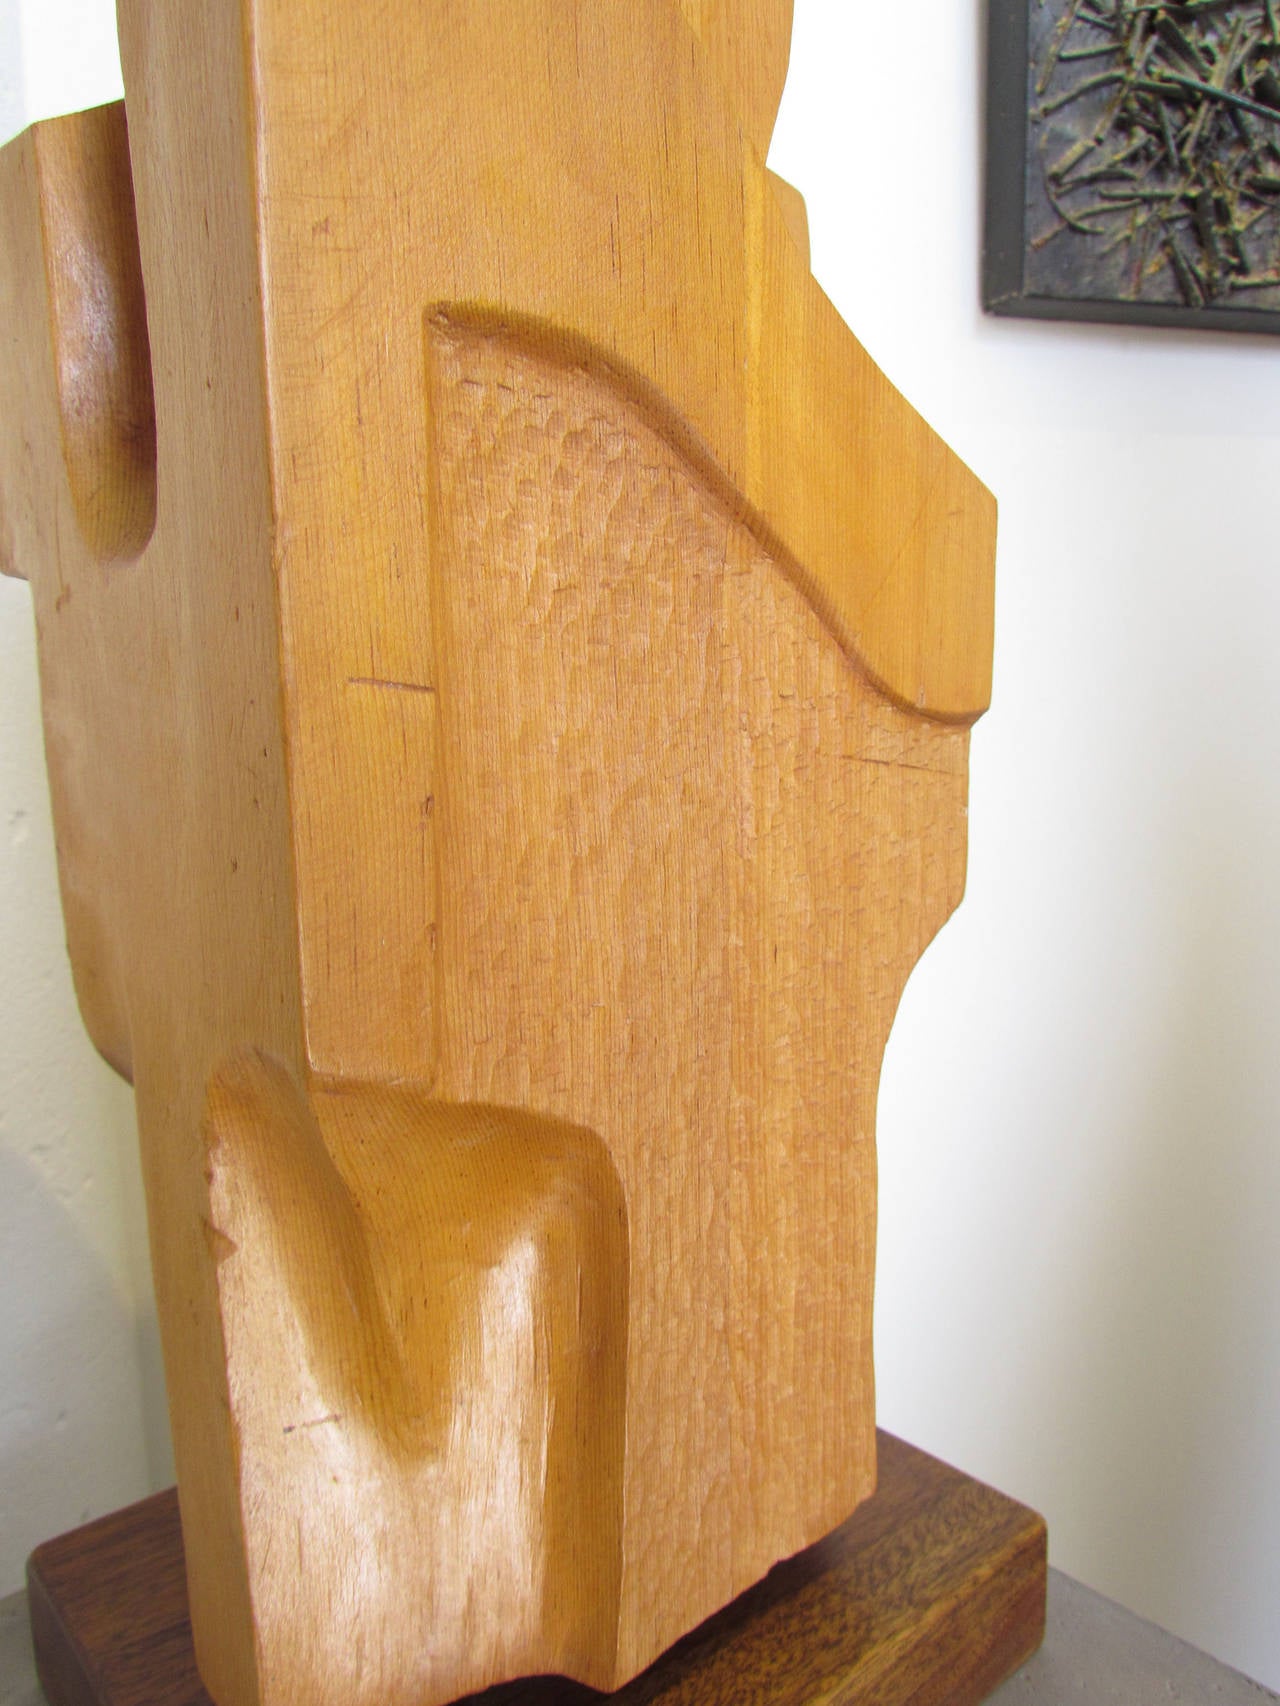 Mid-Century Modern Abstract Hand-Carved Wood Sculpture Signed and Dated 1971